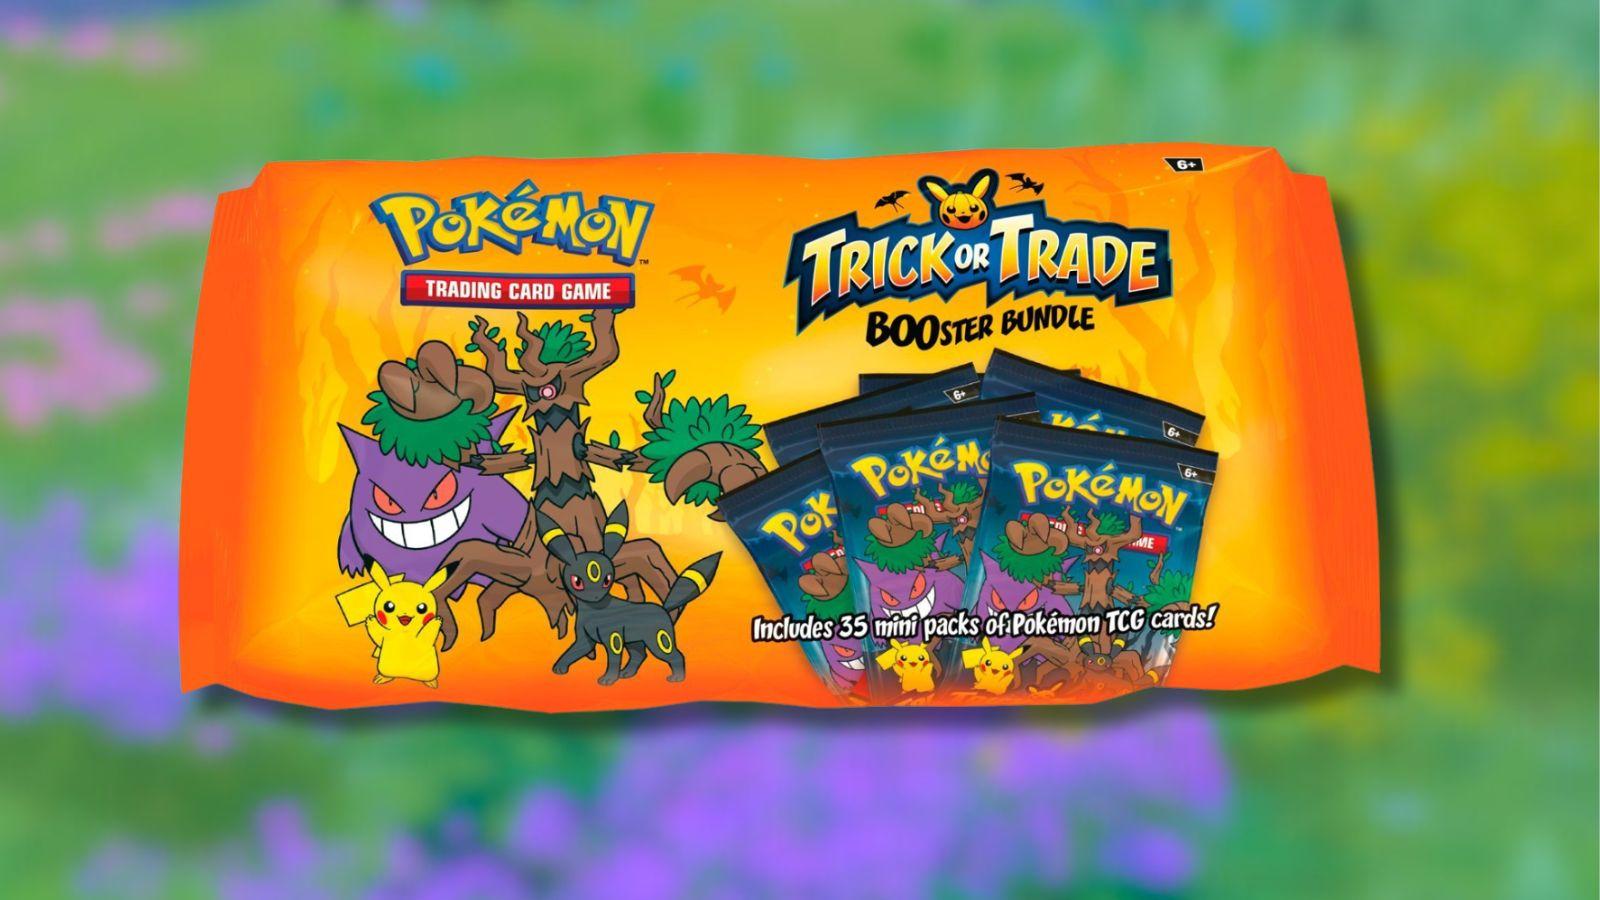 Pokemon TCG Trick or Trade BOOster Bundle with floral background.